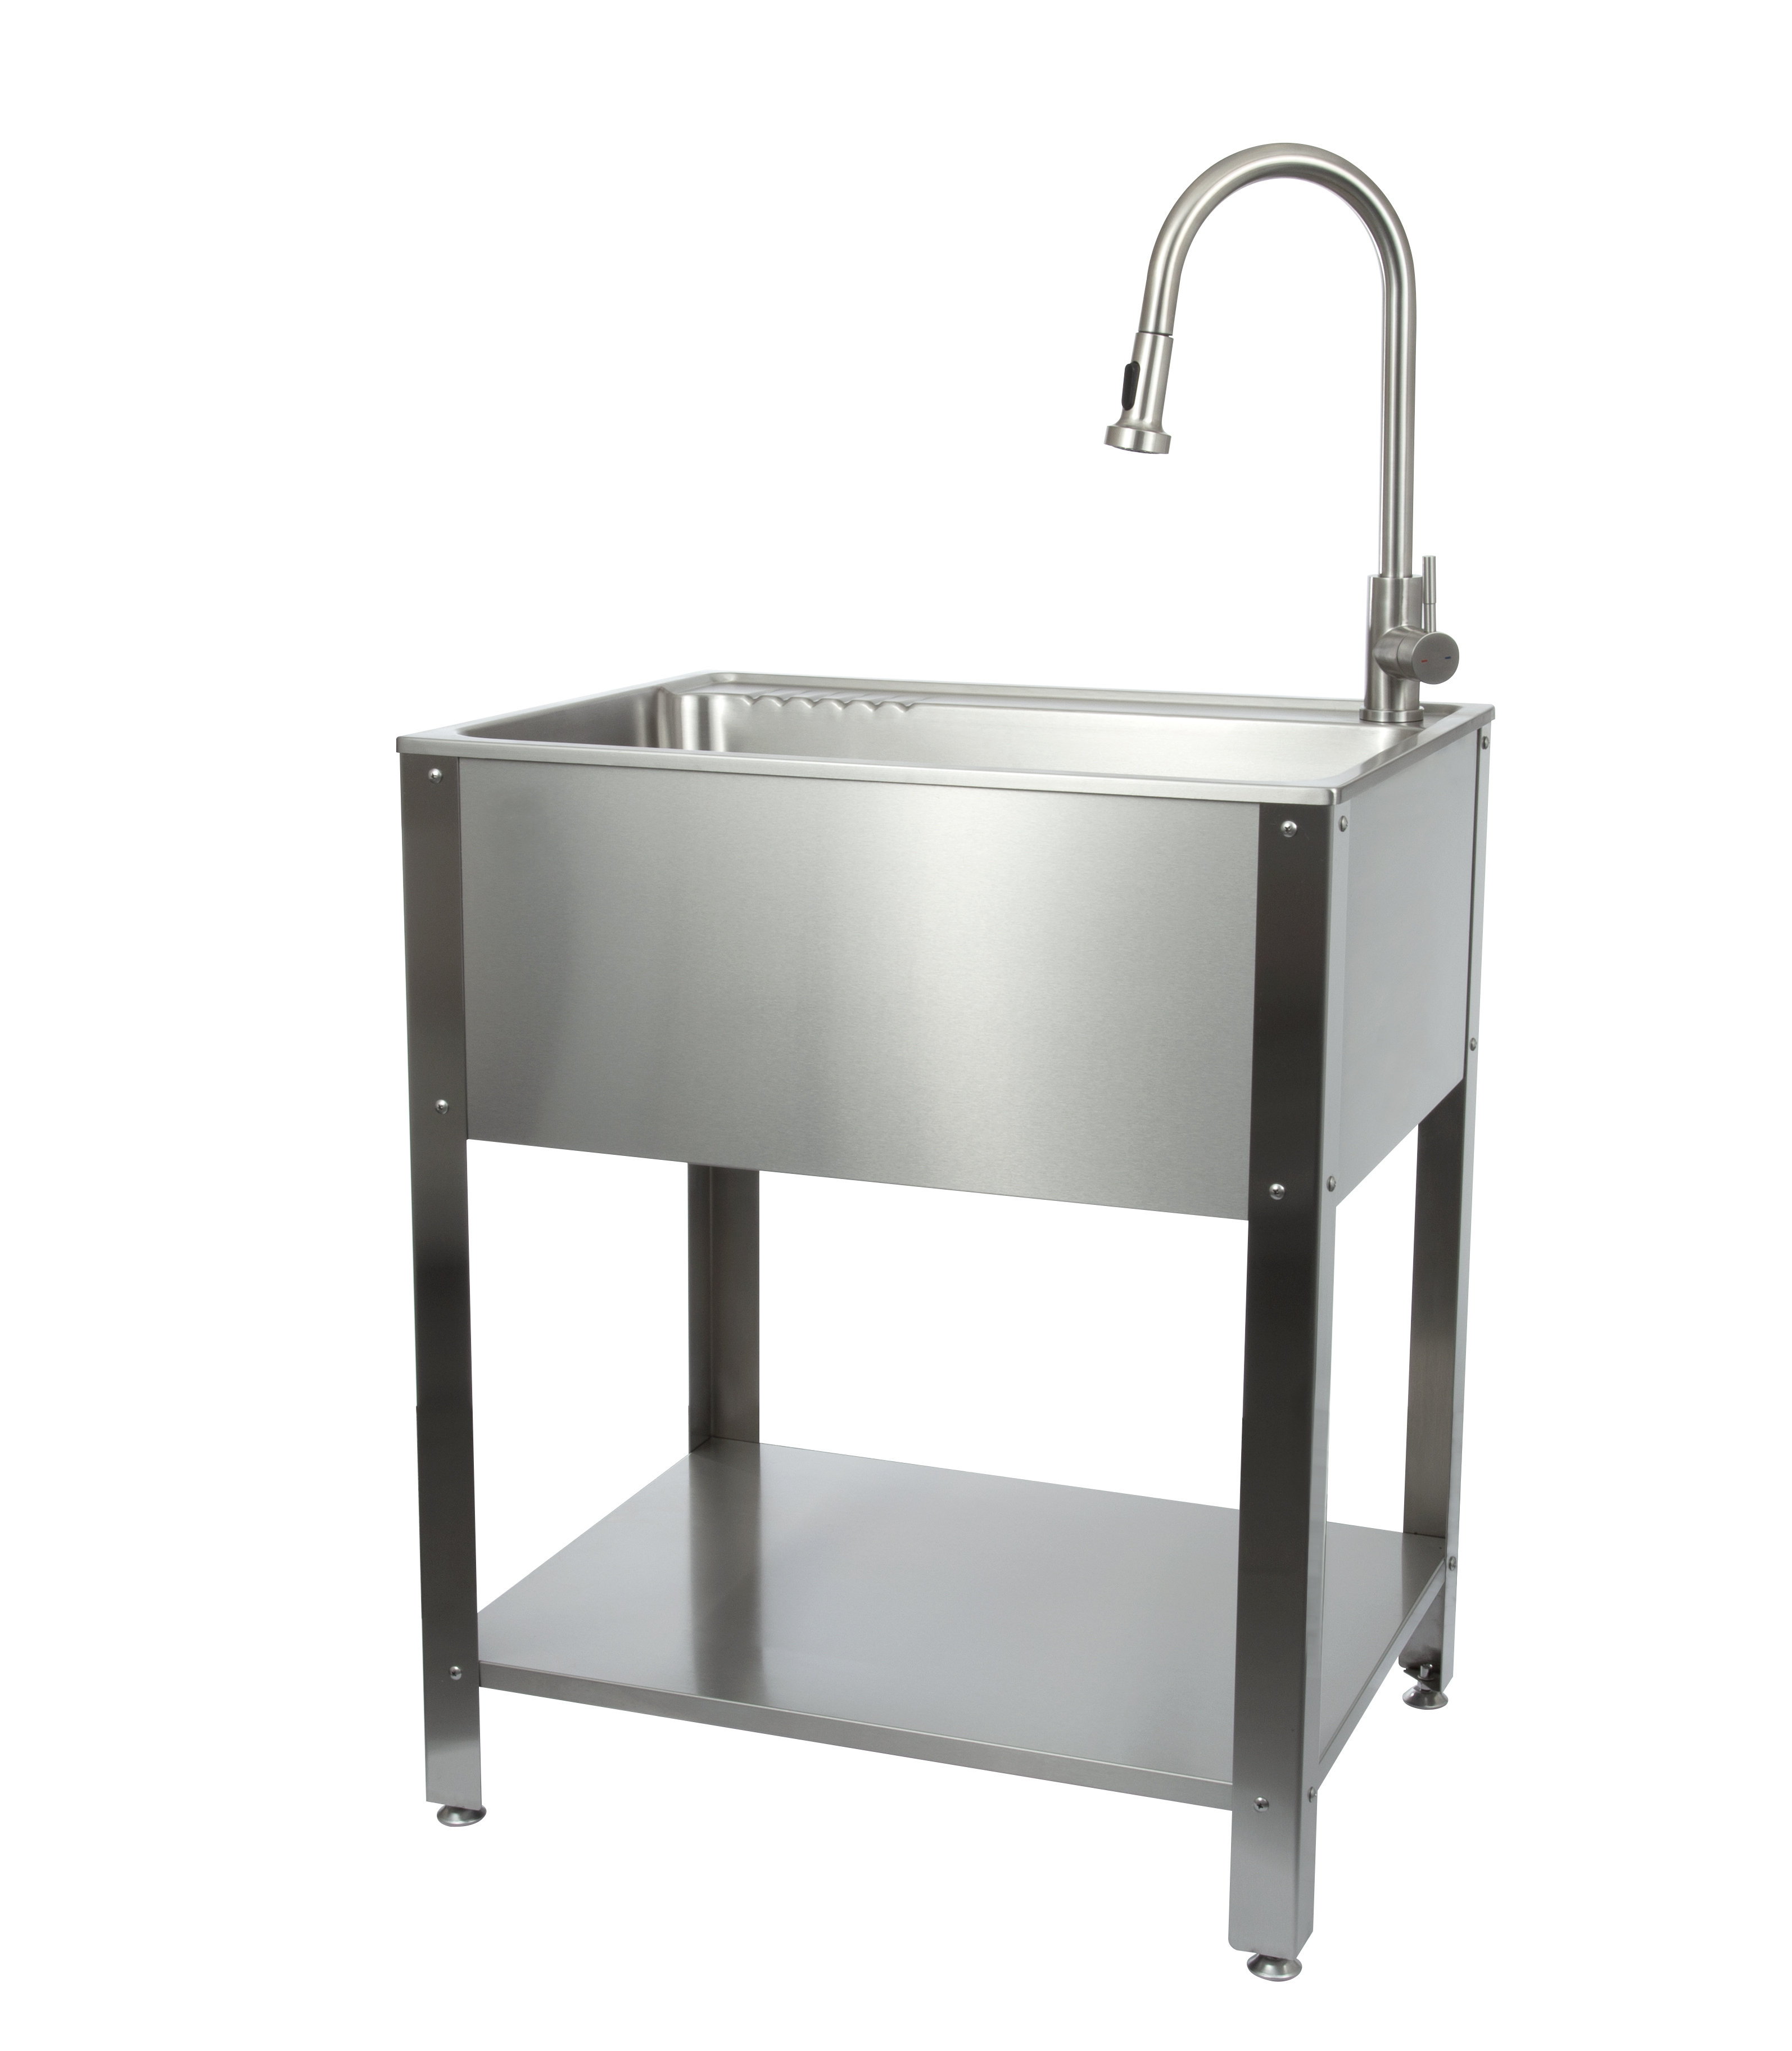 Kitchen Sink and Cabinet Combo,Utility Laundry Sink with Stainless Steel  Basin,Bathroom Vanity Aluminum Base Cabinet,Single Freestanding Garage Sink